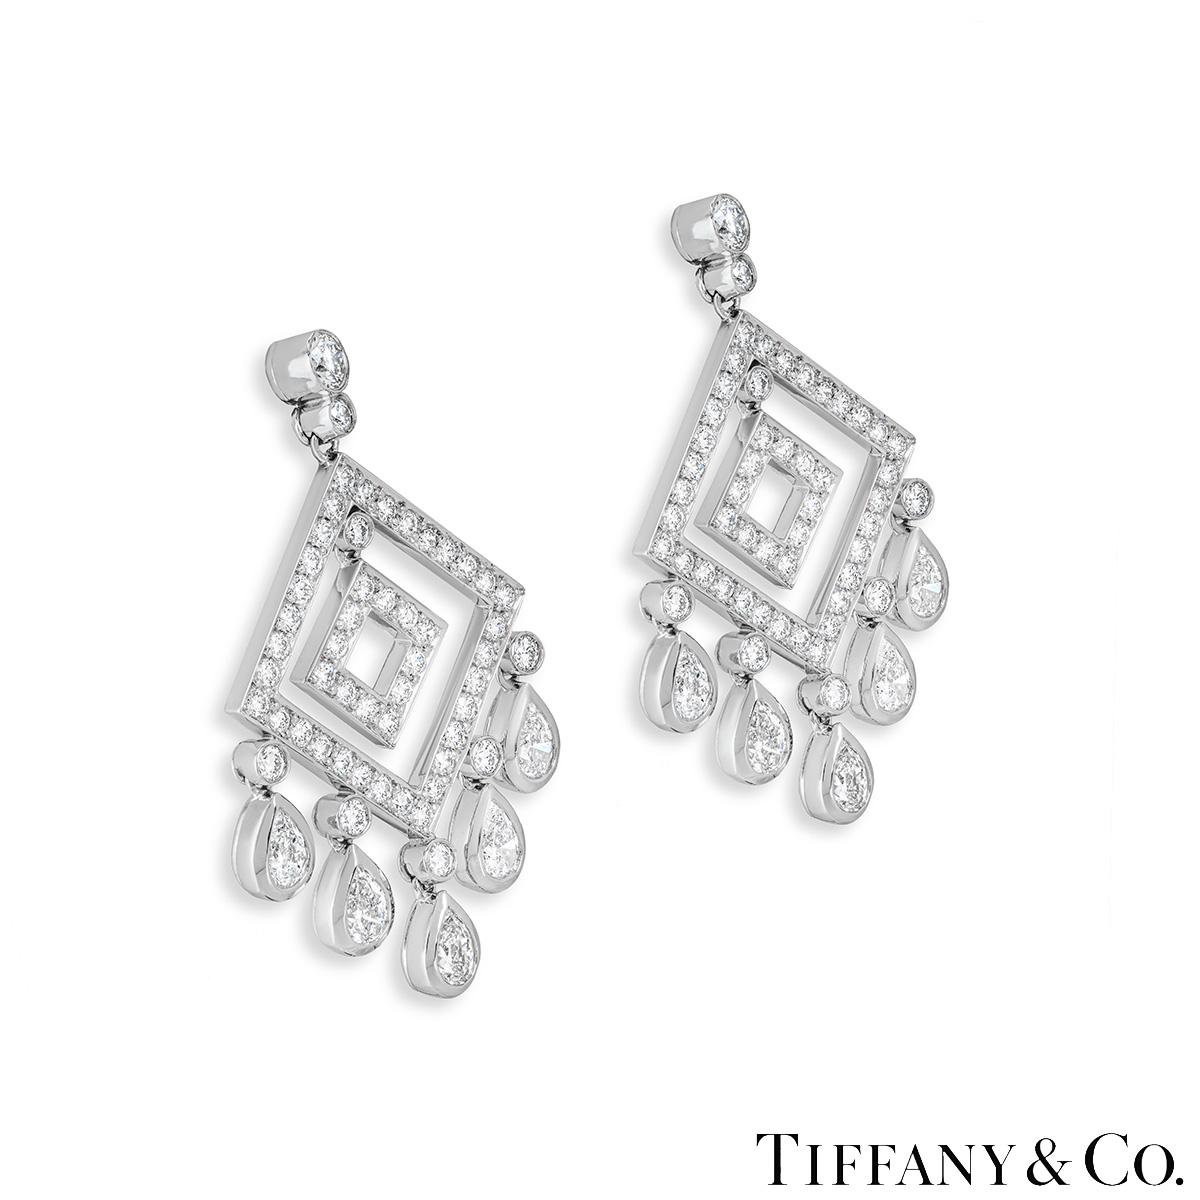 A sparkly pair of platinum diamond earrings by Tiffany & Co. from the Legacy collection. The earrings are set to the top with two graduating round brilliant cut diamonds leading to an openwork kite motif with a freely moving smaller kite motif in